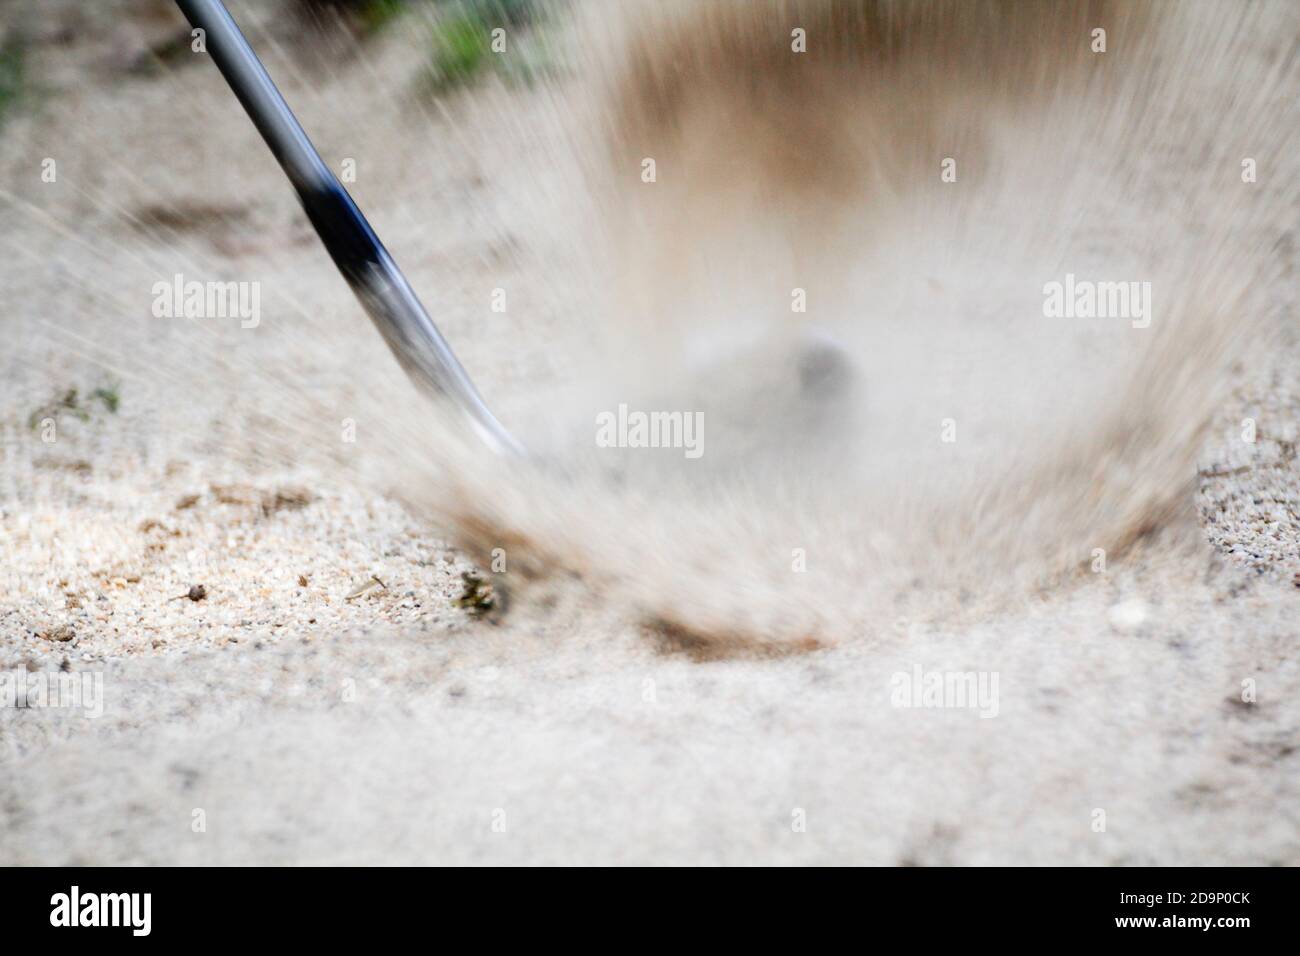 Golf sand wedge hitting in trap Stock Photo